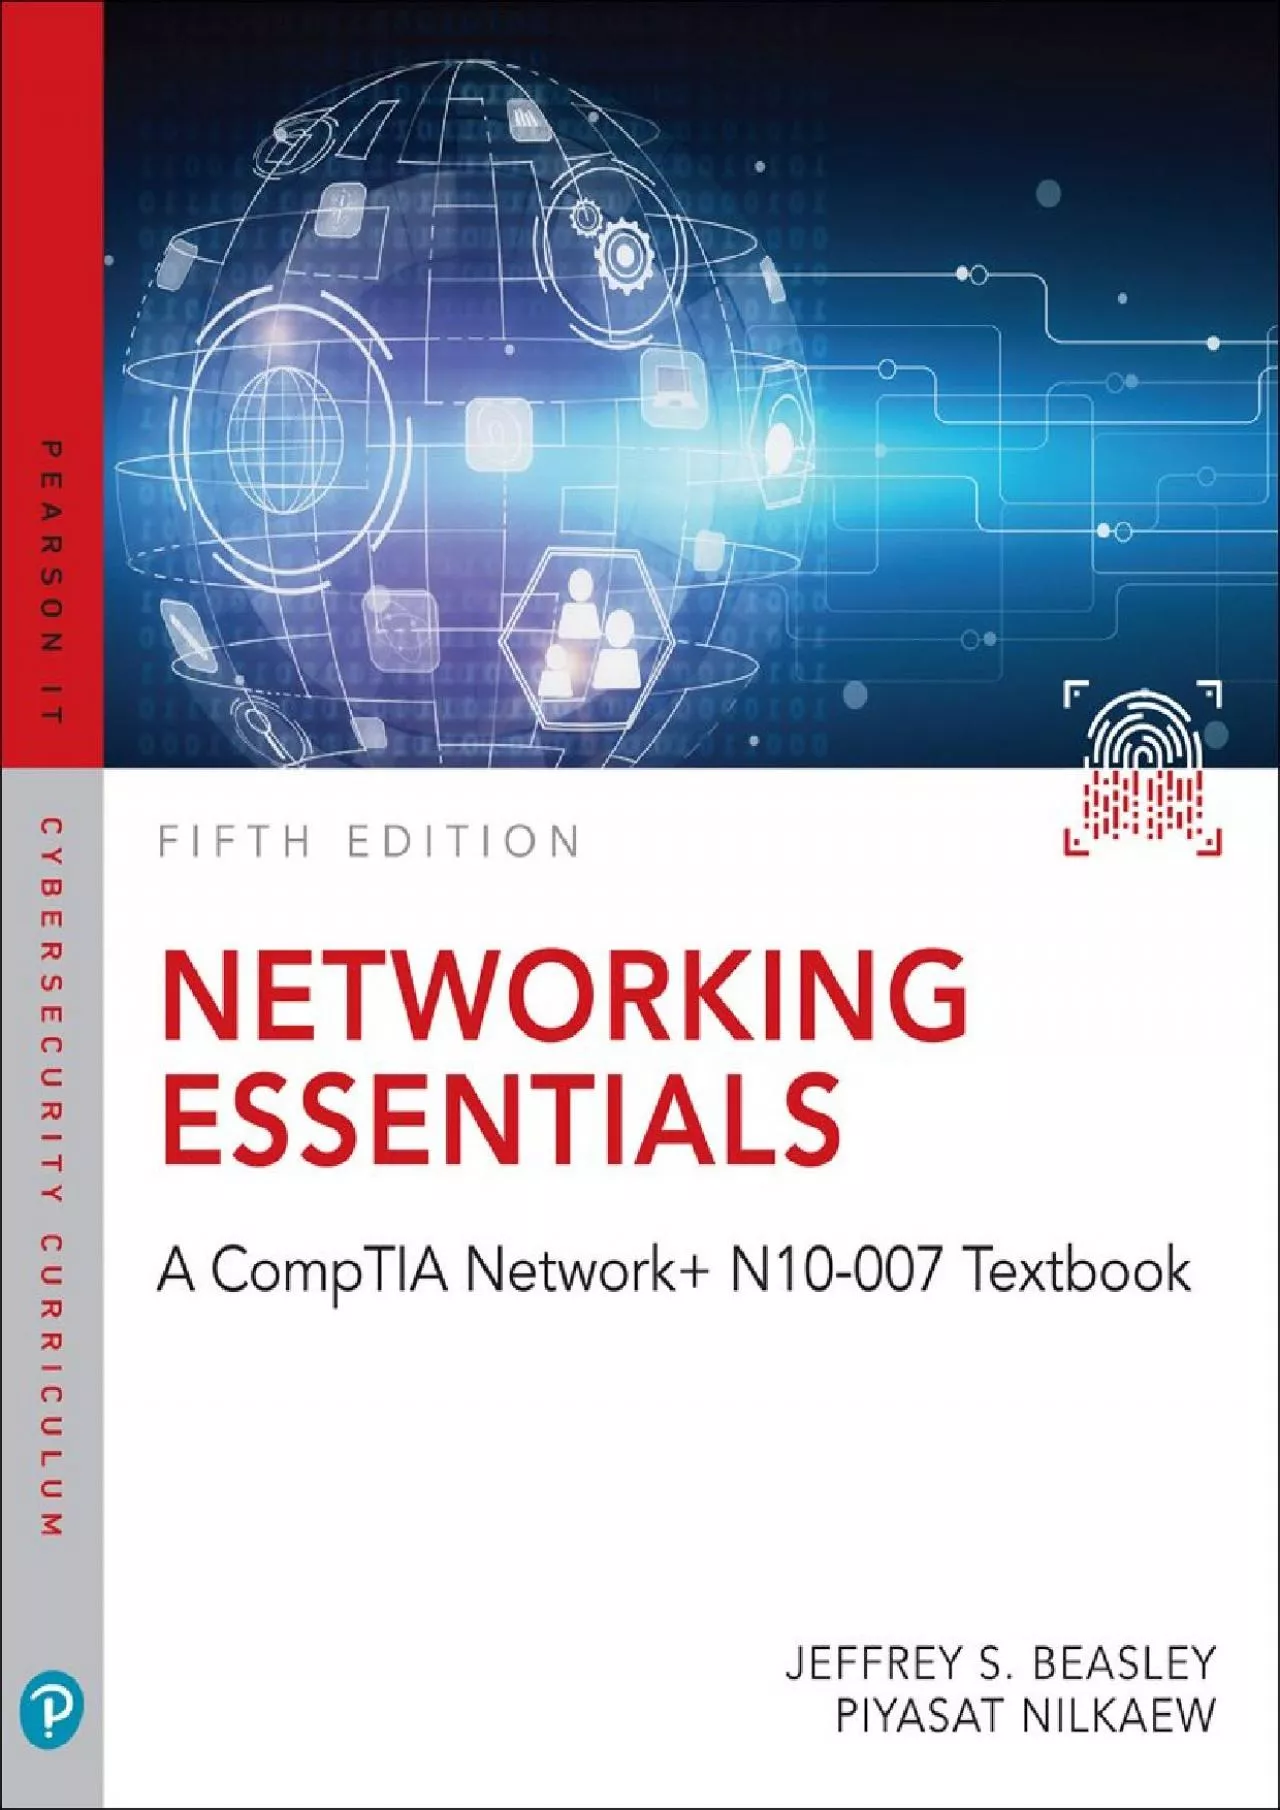 [DOWLOAD]-Networking Essentials: A CompTIA Network+ N10-007 Textbook (Pearson IT Cybersecurity